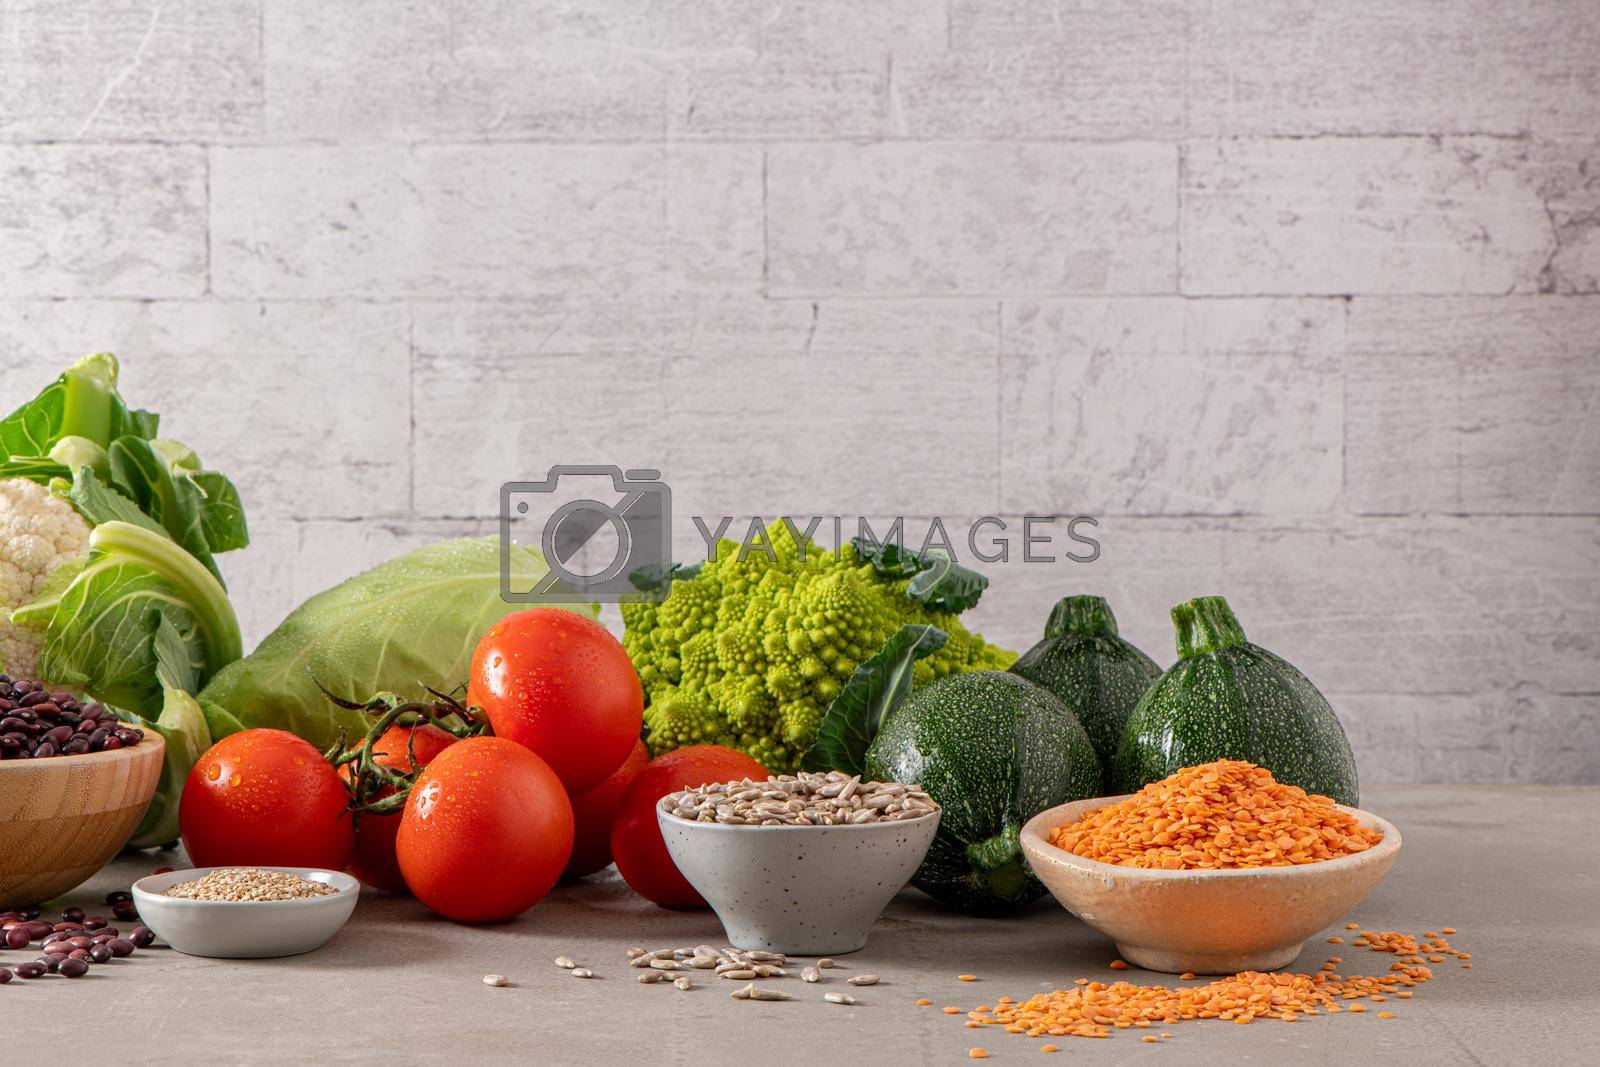 Royalty free image of Healthy food selection by homydesign